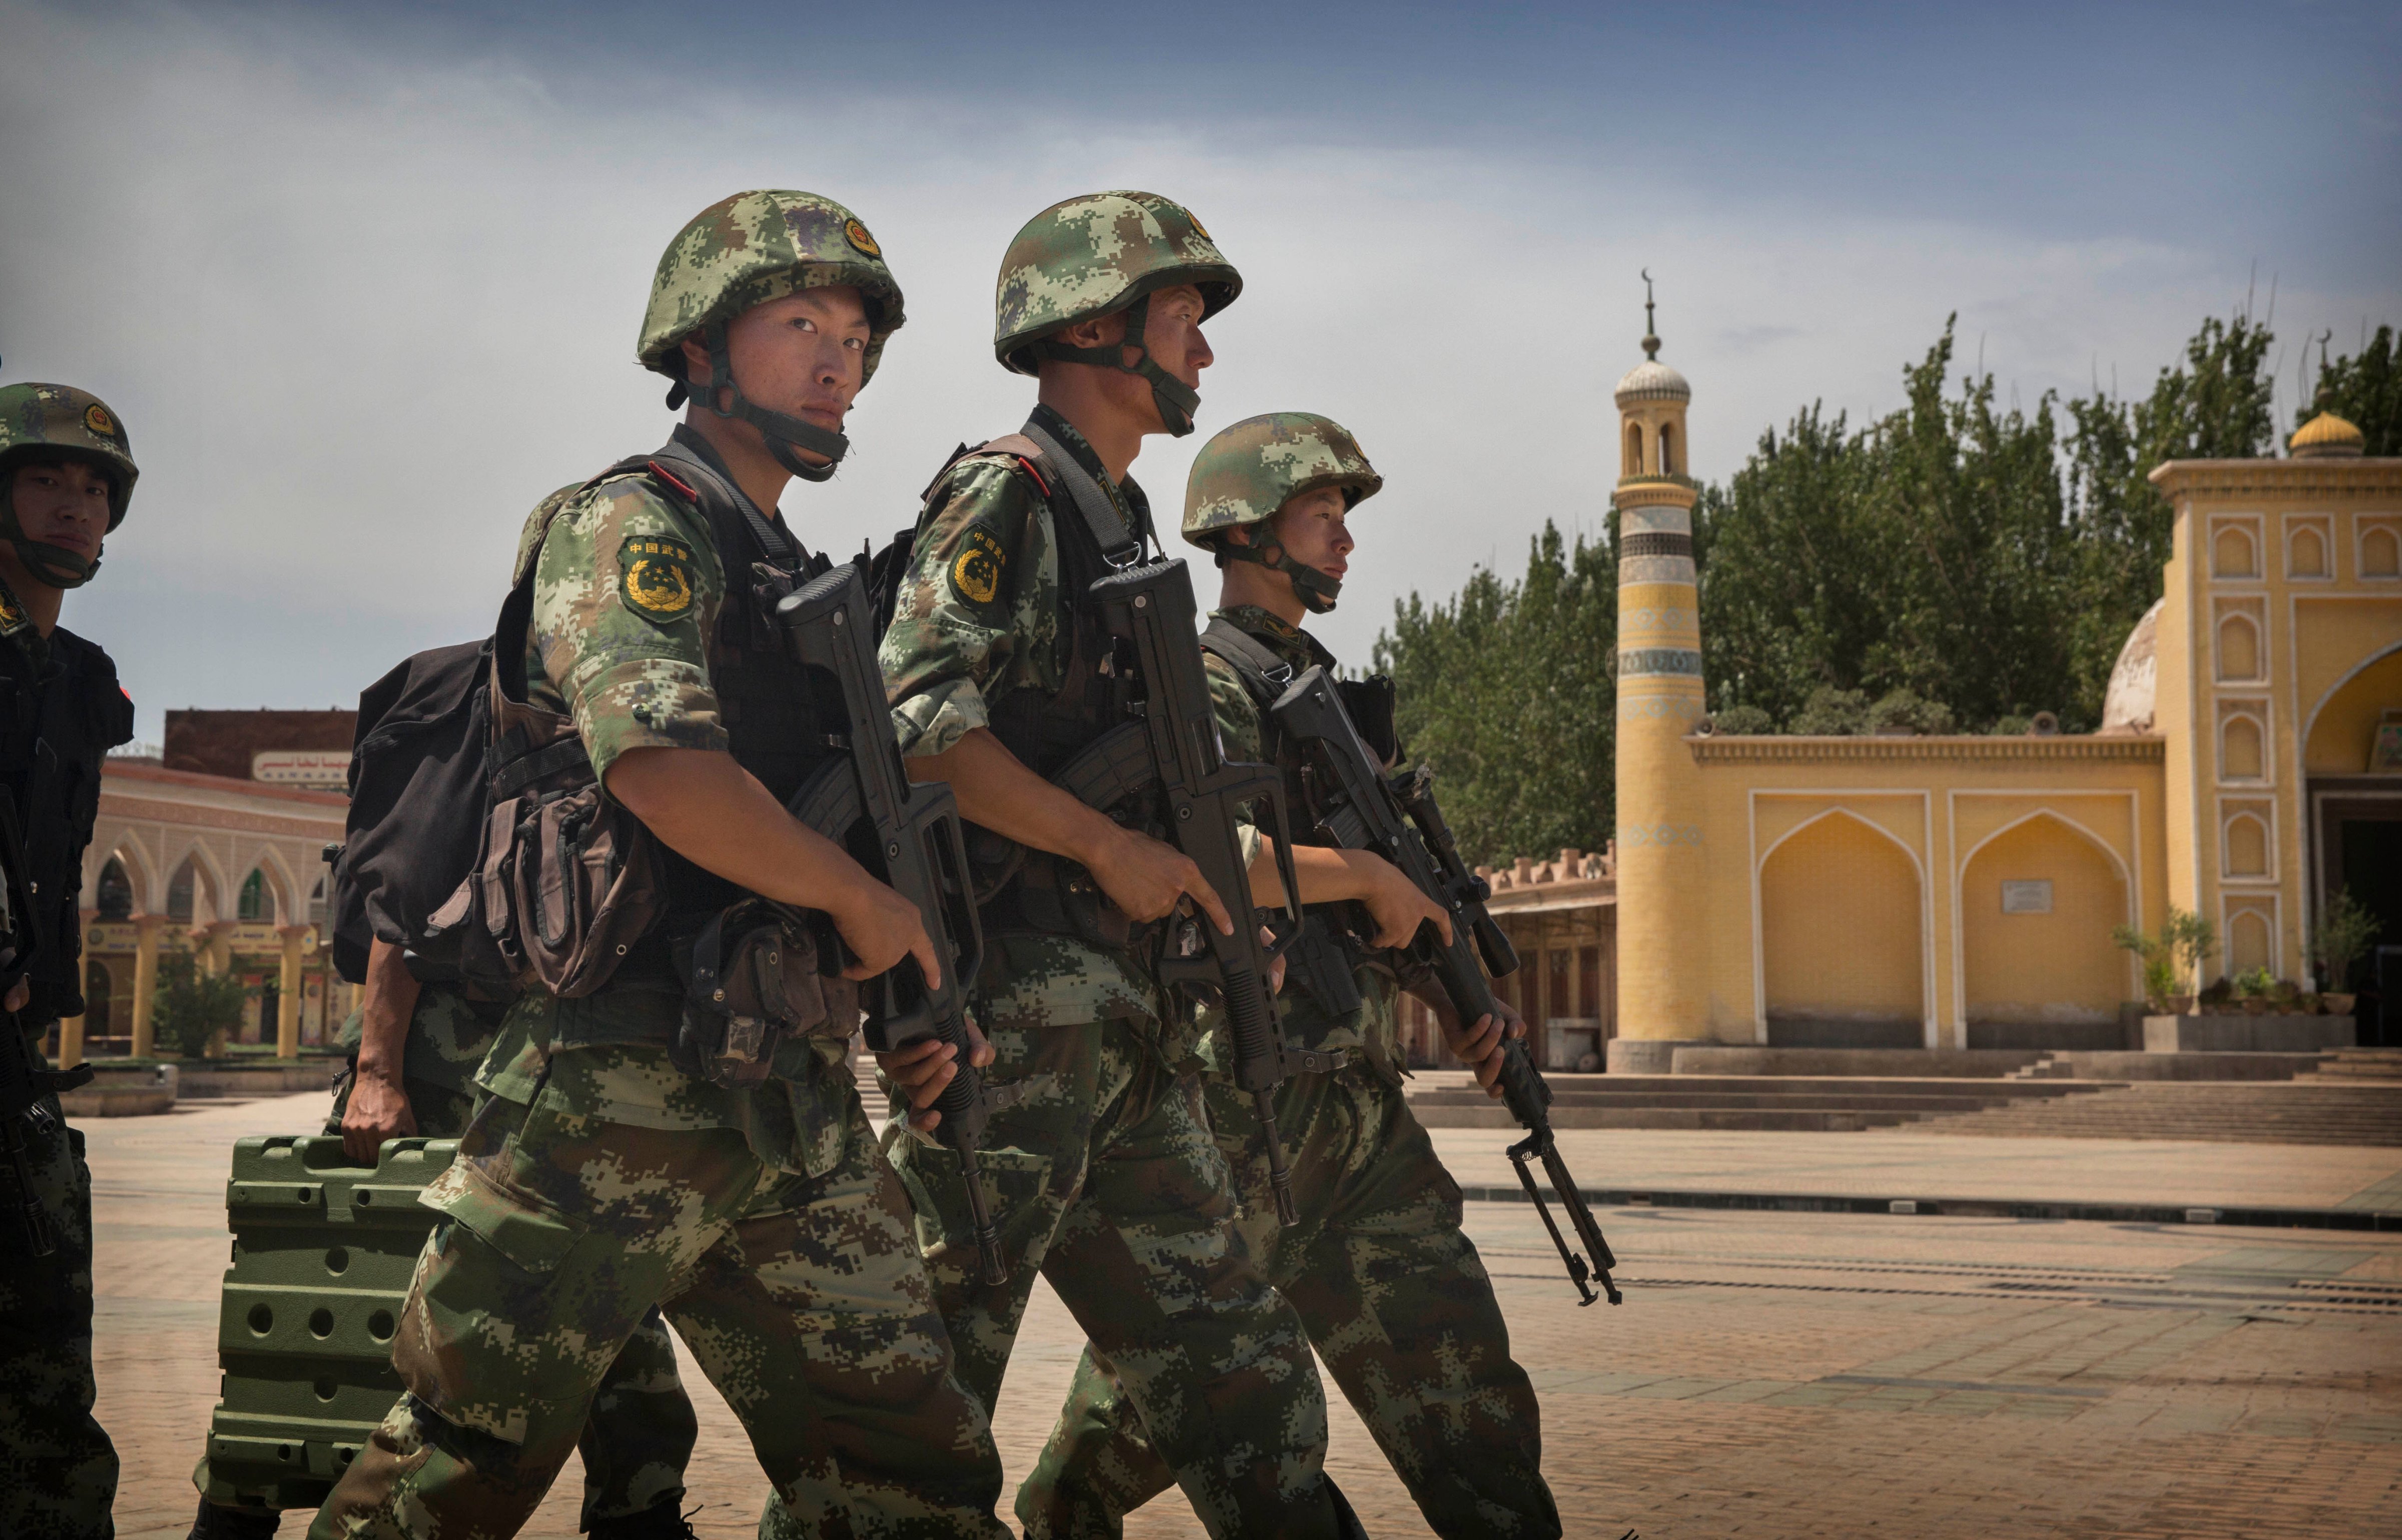 Chinese soldiers march in front of the Id Kah Mosque, China's largest, in Kashgar, on July 31, 2014. China has increased security in many parts of restive Xinjiang  following some of the worst violence in months (Kevin Frayer—Getty Images)